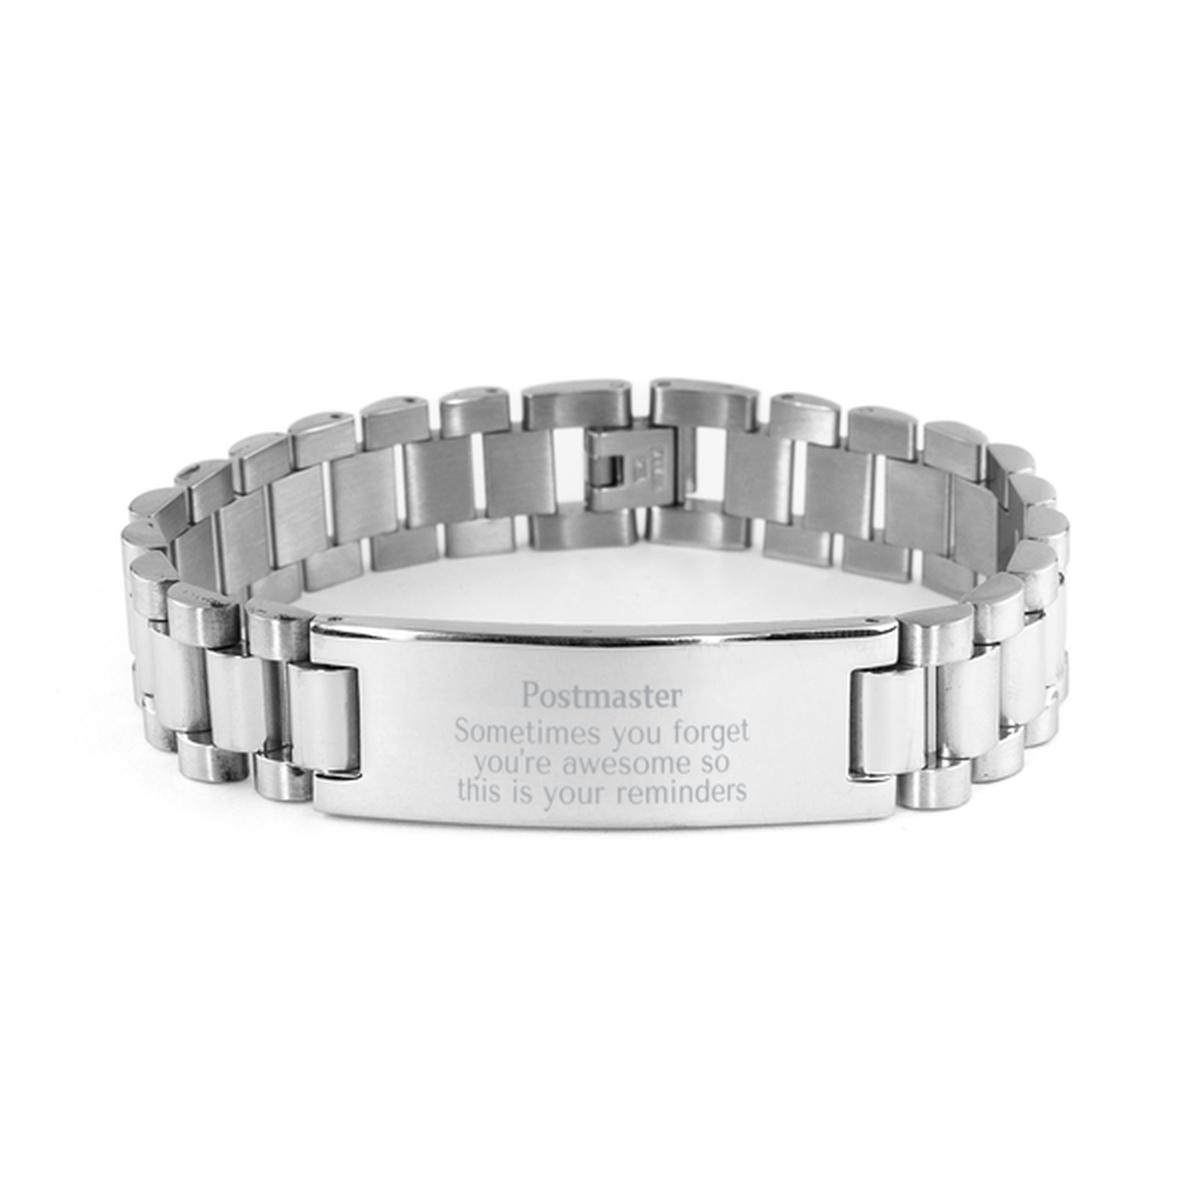 Sentimental Postmaster Ladder Stainless Steel Bracelet, Postmaster Sometimes you forget you're awesome so this is your reminders, Graduation Christmas Birthday Gifts for Postmaster, Men, Women, Coworkers